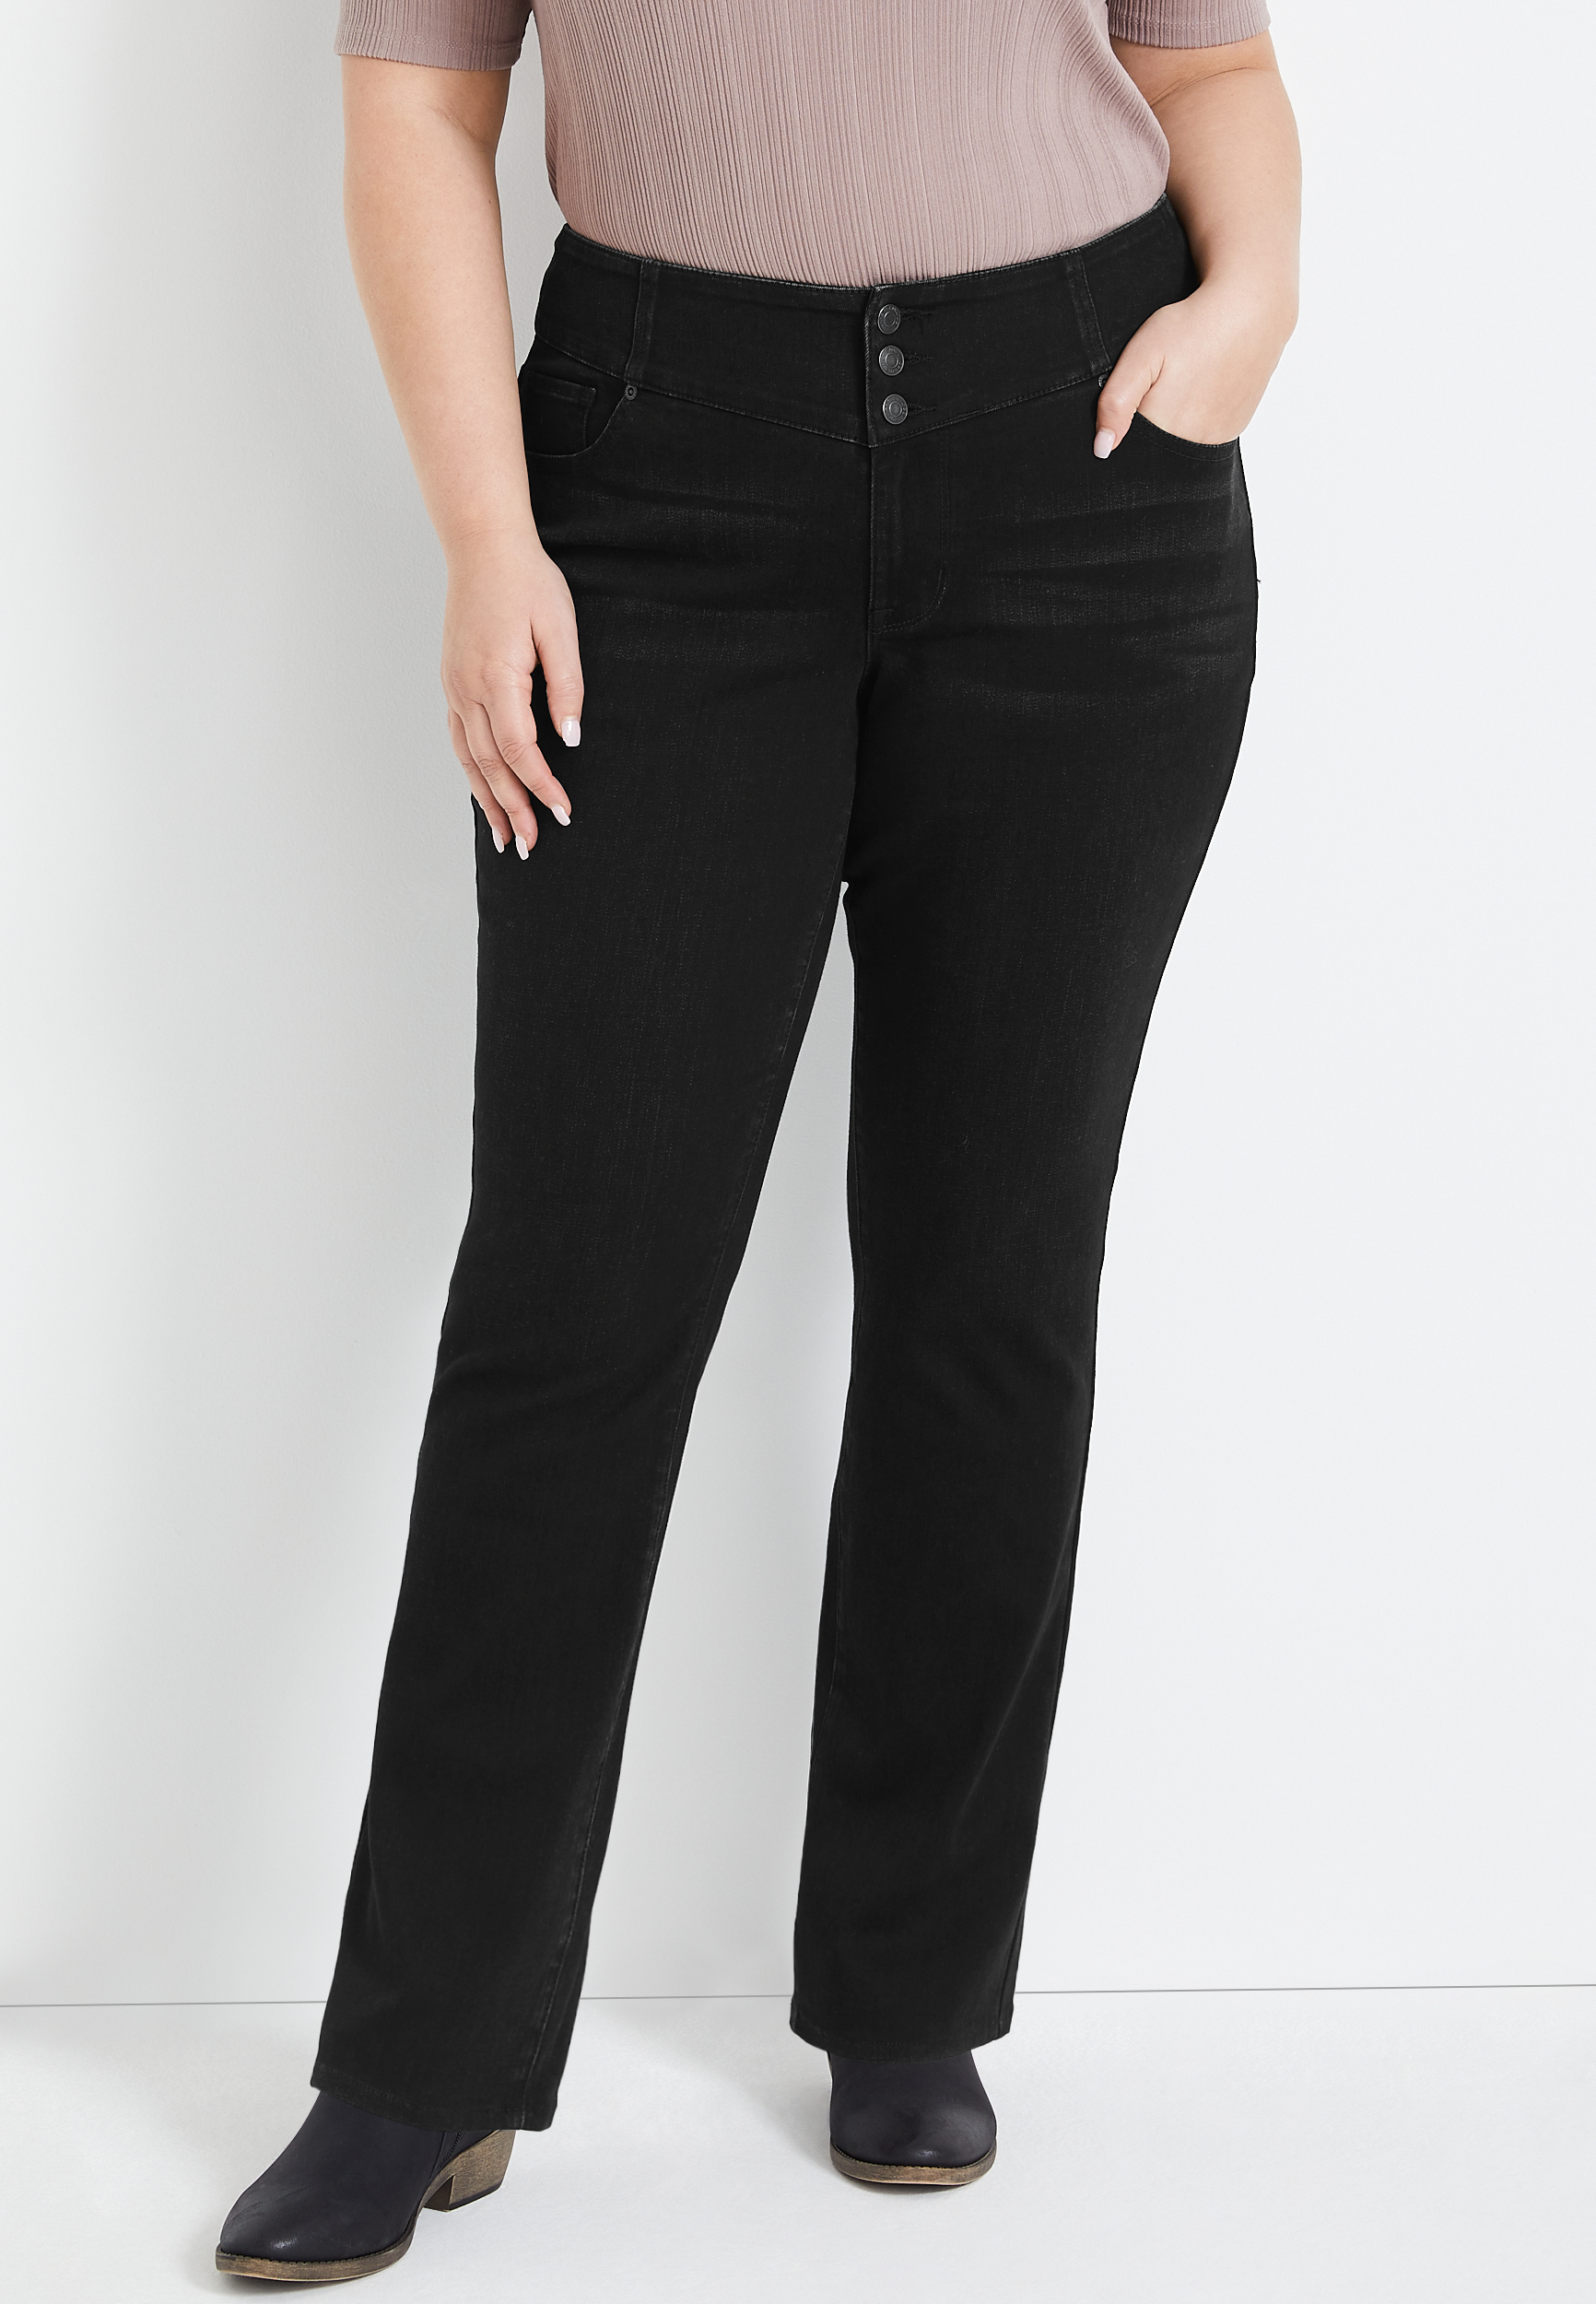 Plus Size m jeans by maurices™ Cool Comfort Black Slim Boot High Rise ...